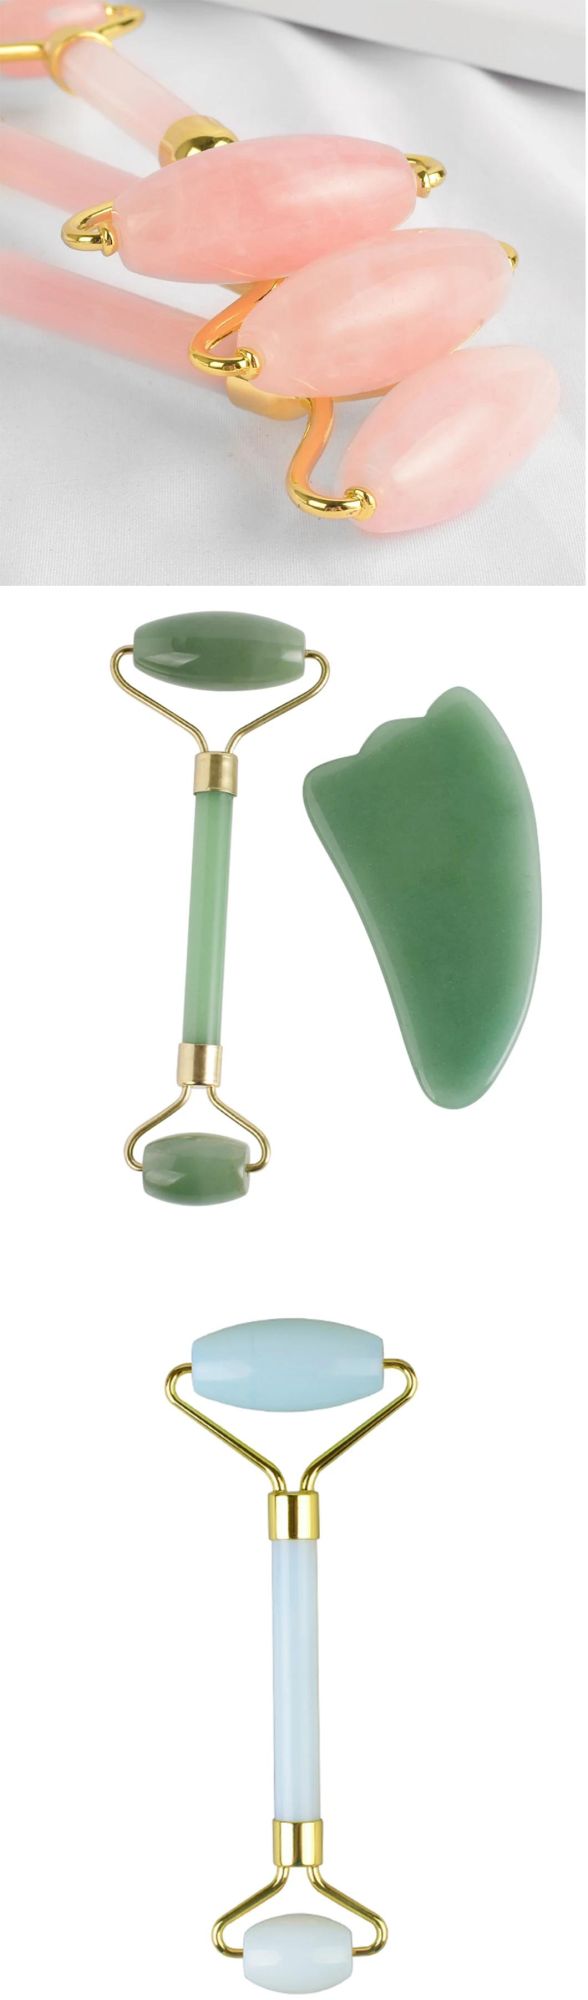 Double Head Natural Facial Massager Opal Jade Roller and Gua Sha Set White Jade Roller with Gift Box for Face Eyes Neck